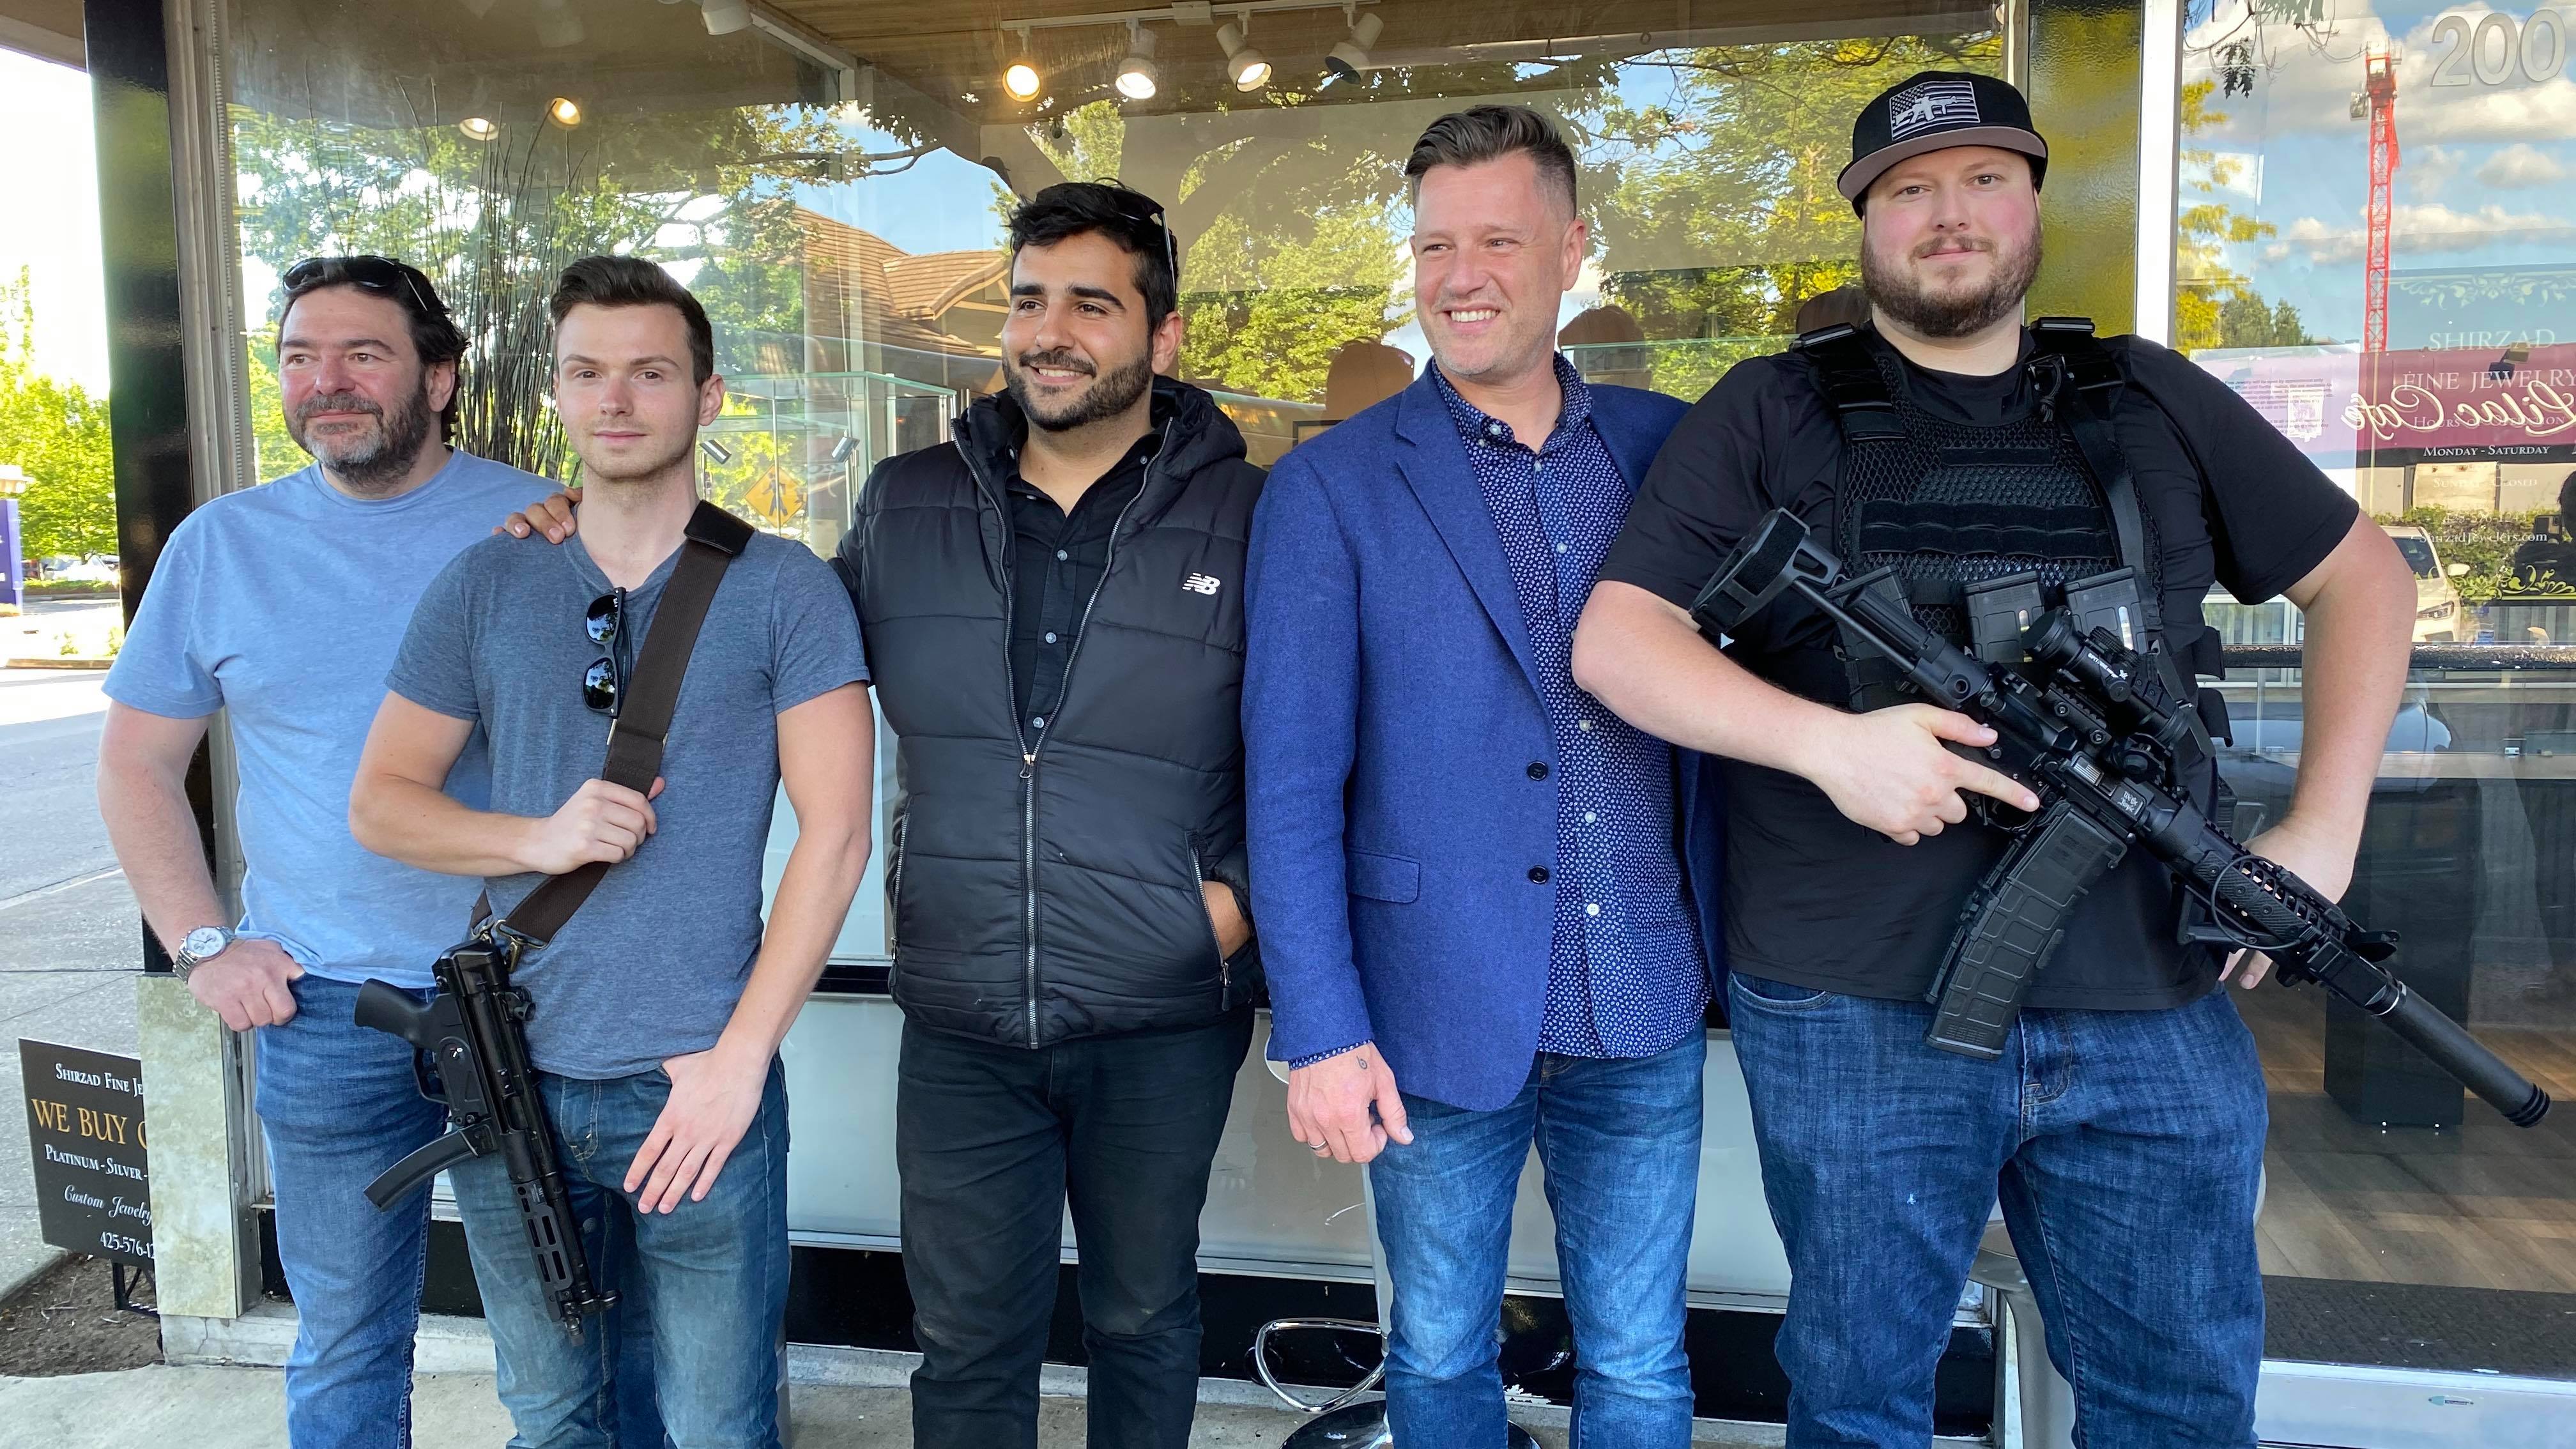 Five men stand together in front of a business, two with AR-15s